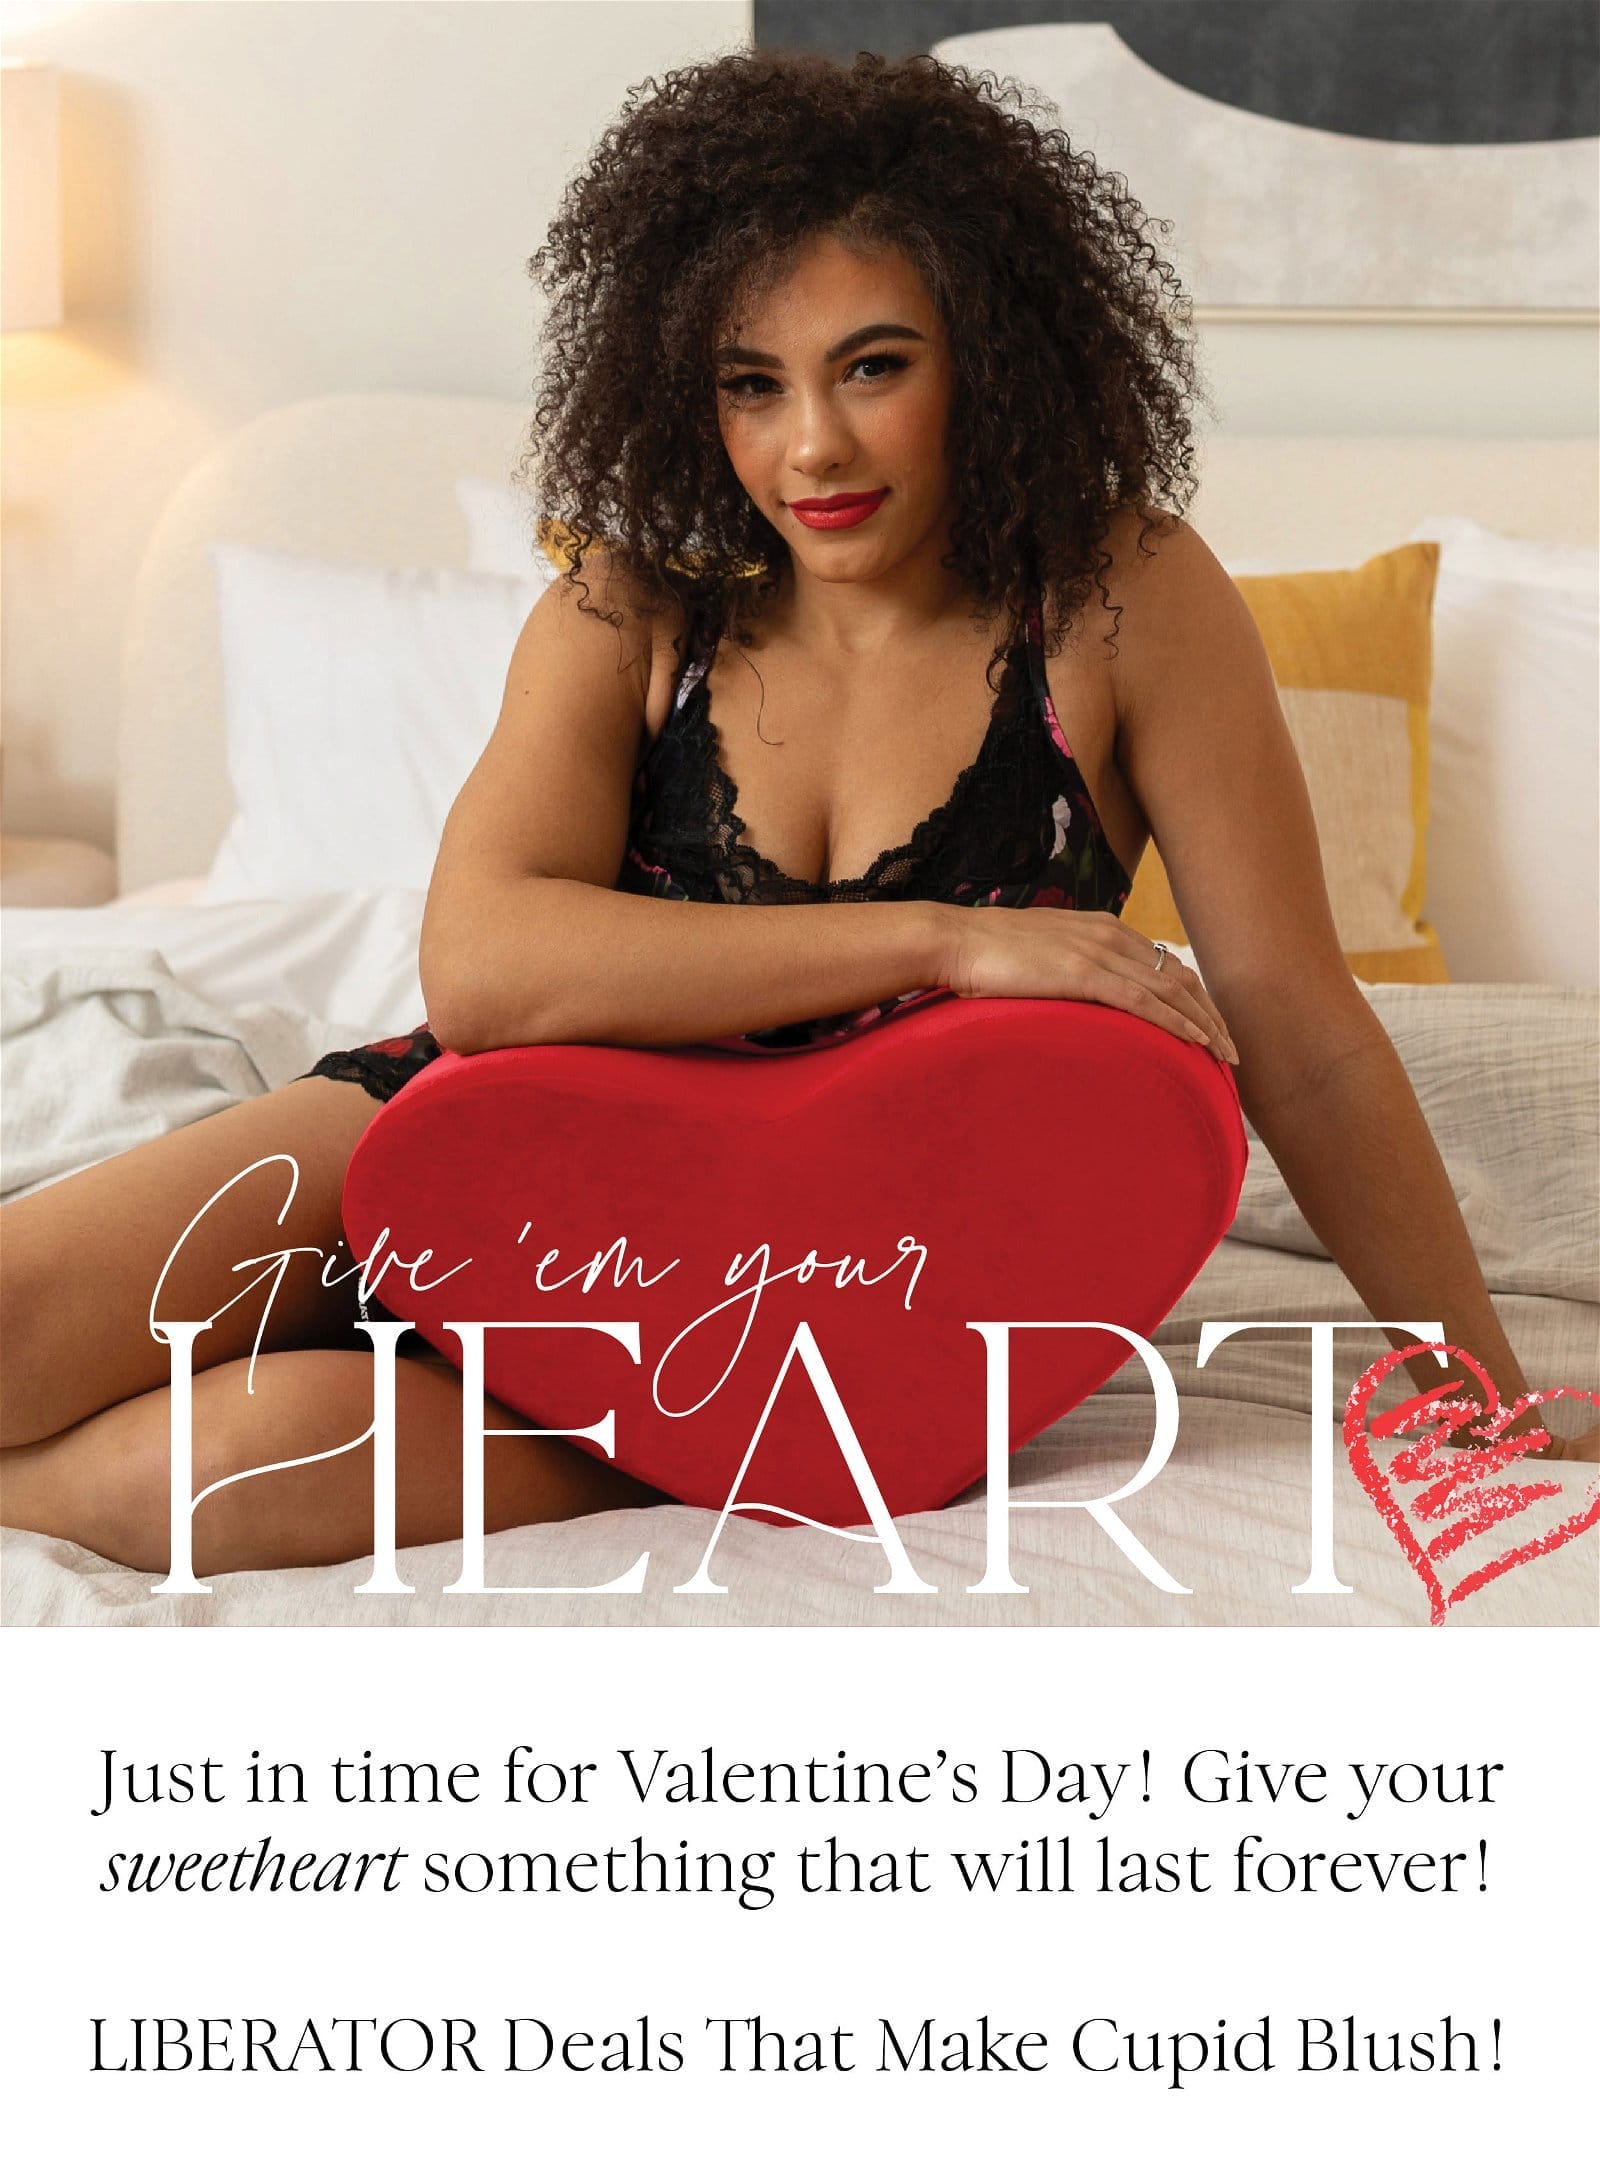 GIVE 'EM YOUR HEART Just in time for Valentine’s Day! Give your sweetheart something that will last forever! LIBERATOR Deals That Make Cupid Blush!